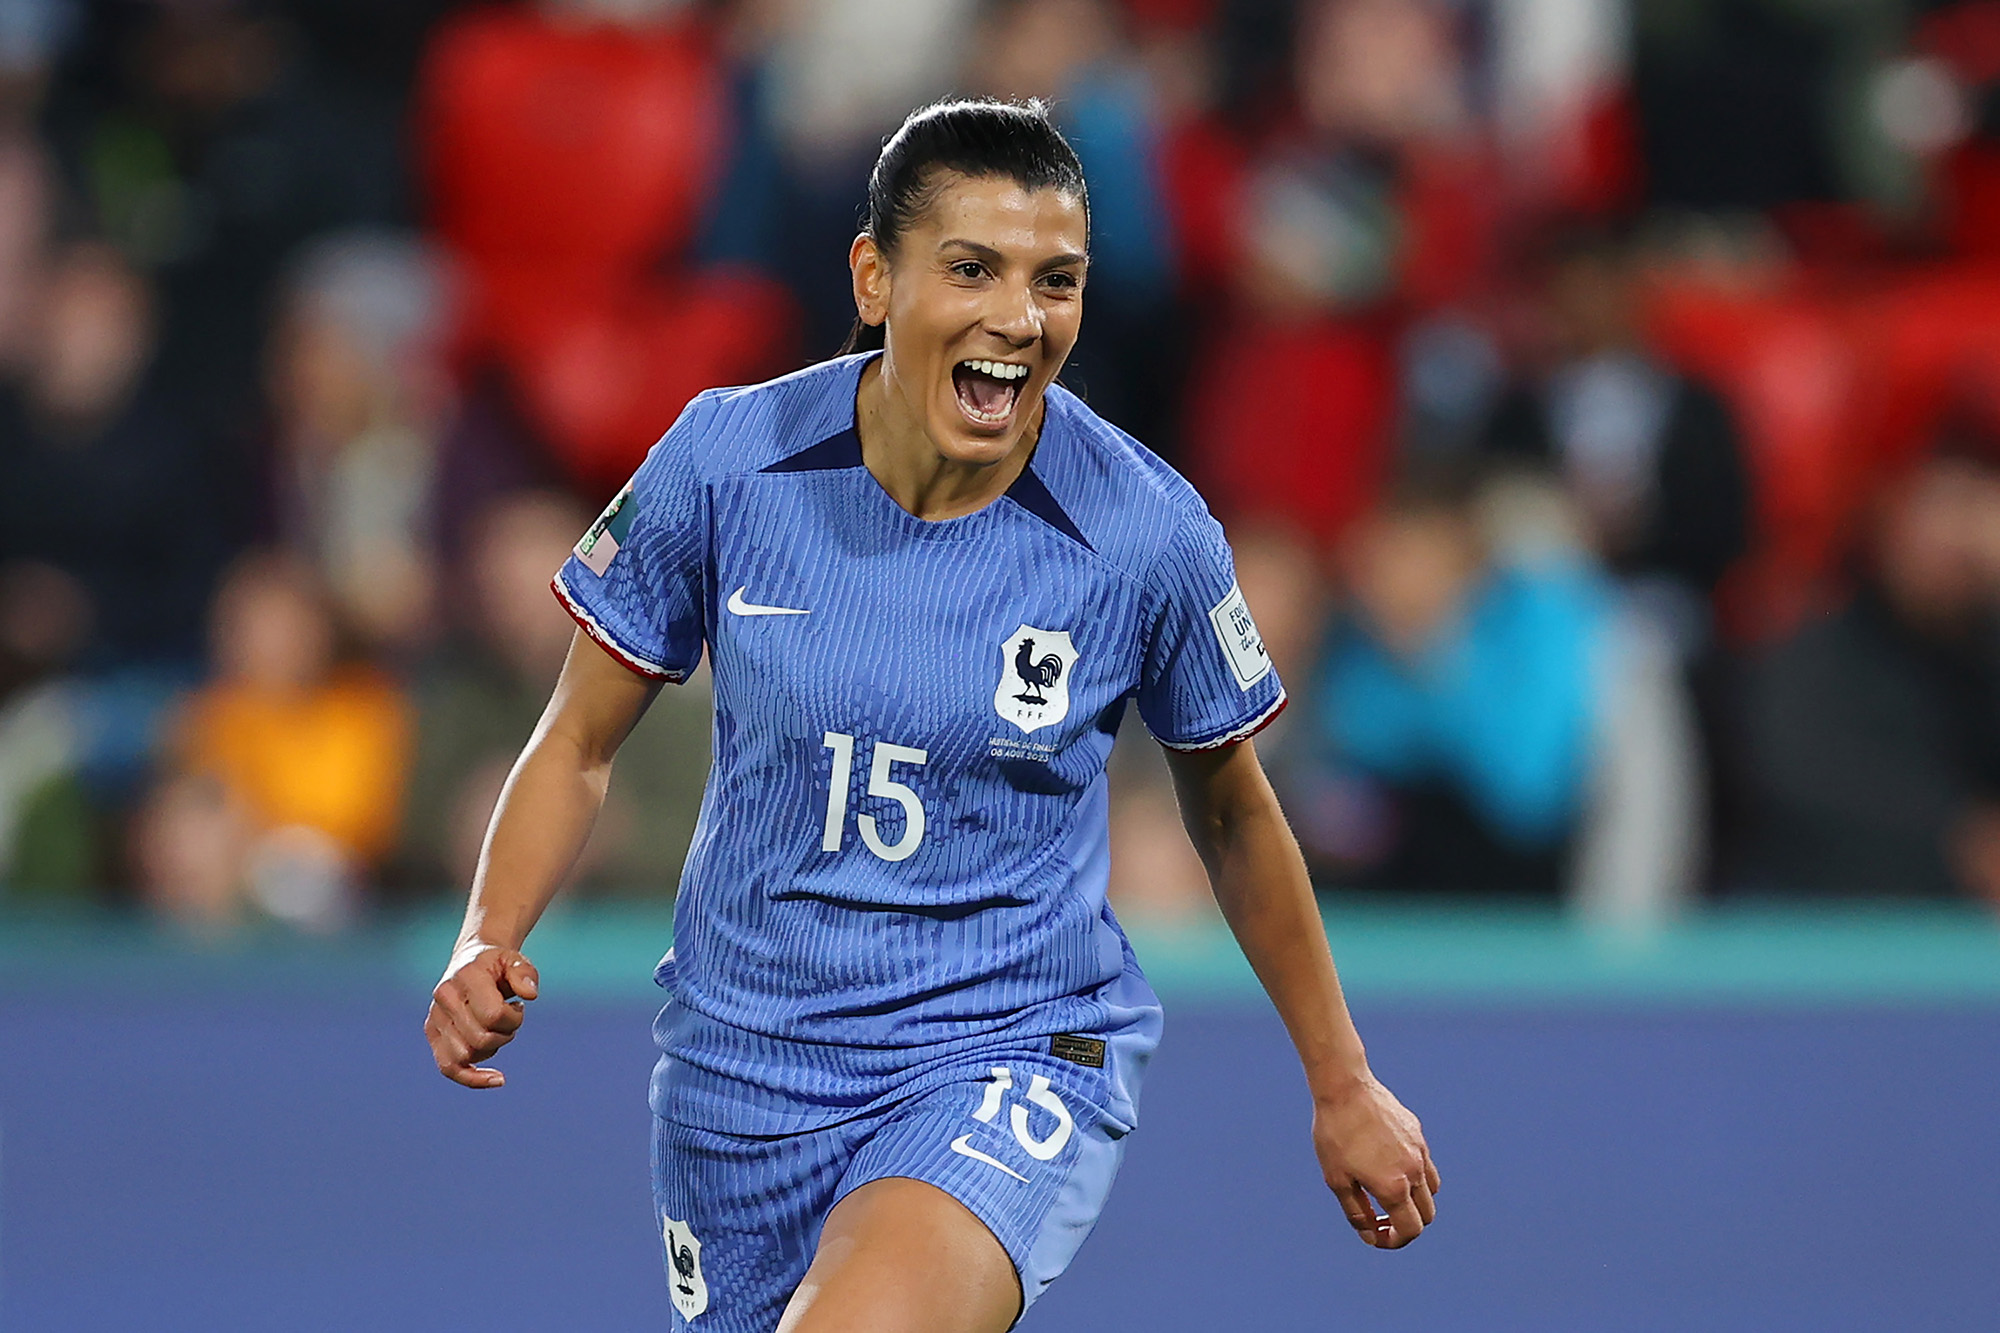 Kenza Dali of France celebrates after scoring her team's second goal against Morocco at Hindmarsh Stadium on August 8 in Adelaide.